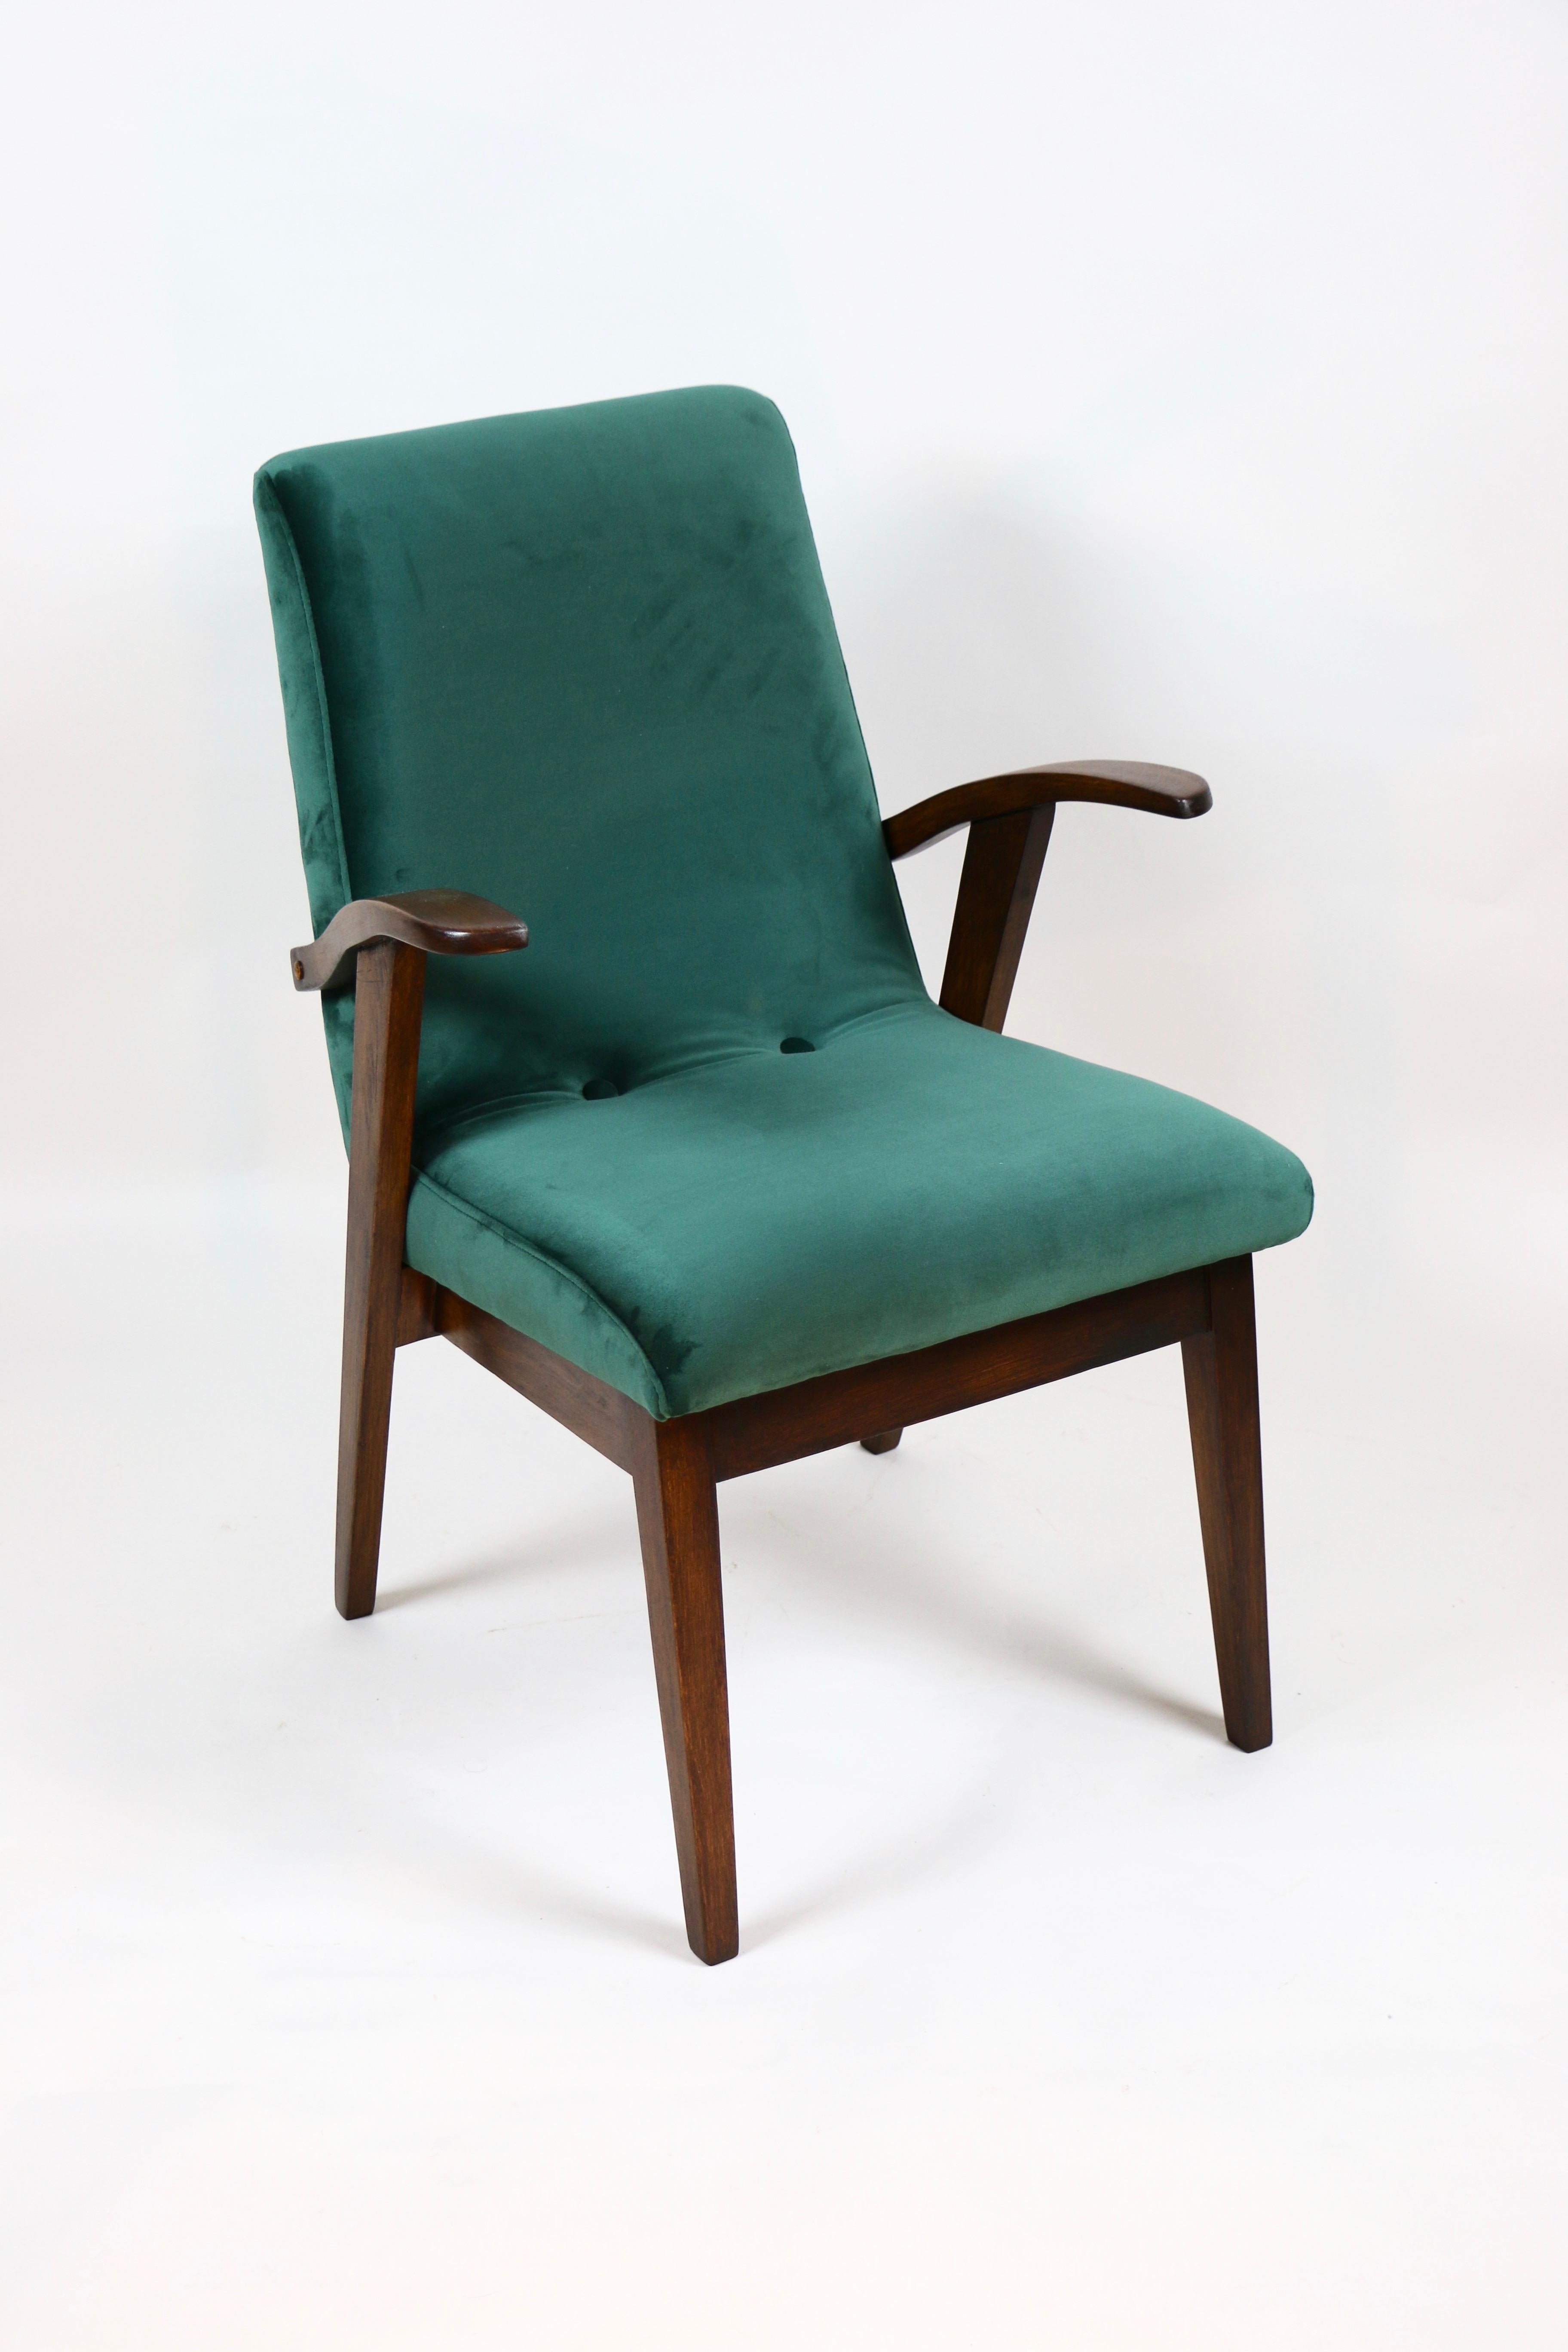 Vintage Armchair in green color from 1970s design by Mieczyslaw Puchala, completely restored, new upholstery covered with fabric in green fashionable velvet. 
Headquarters has been repainted and new upholstery covered. Wood elements in natural dark